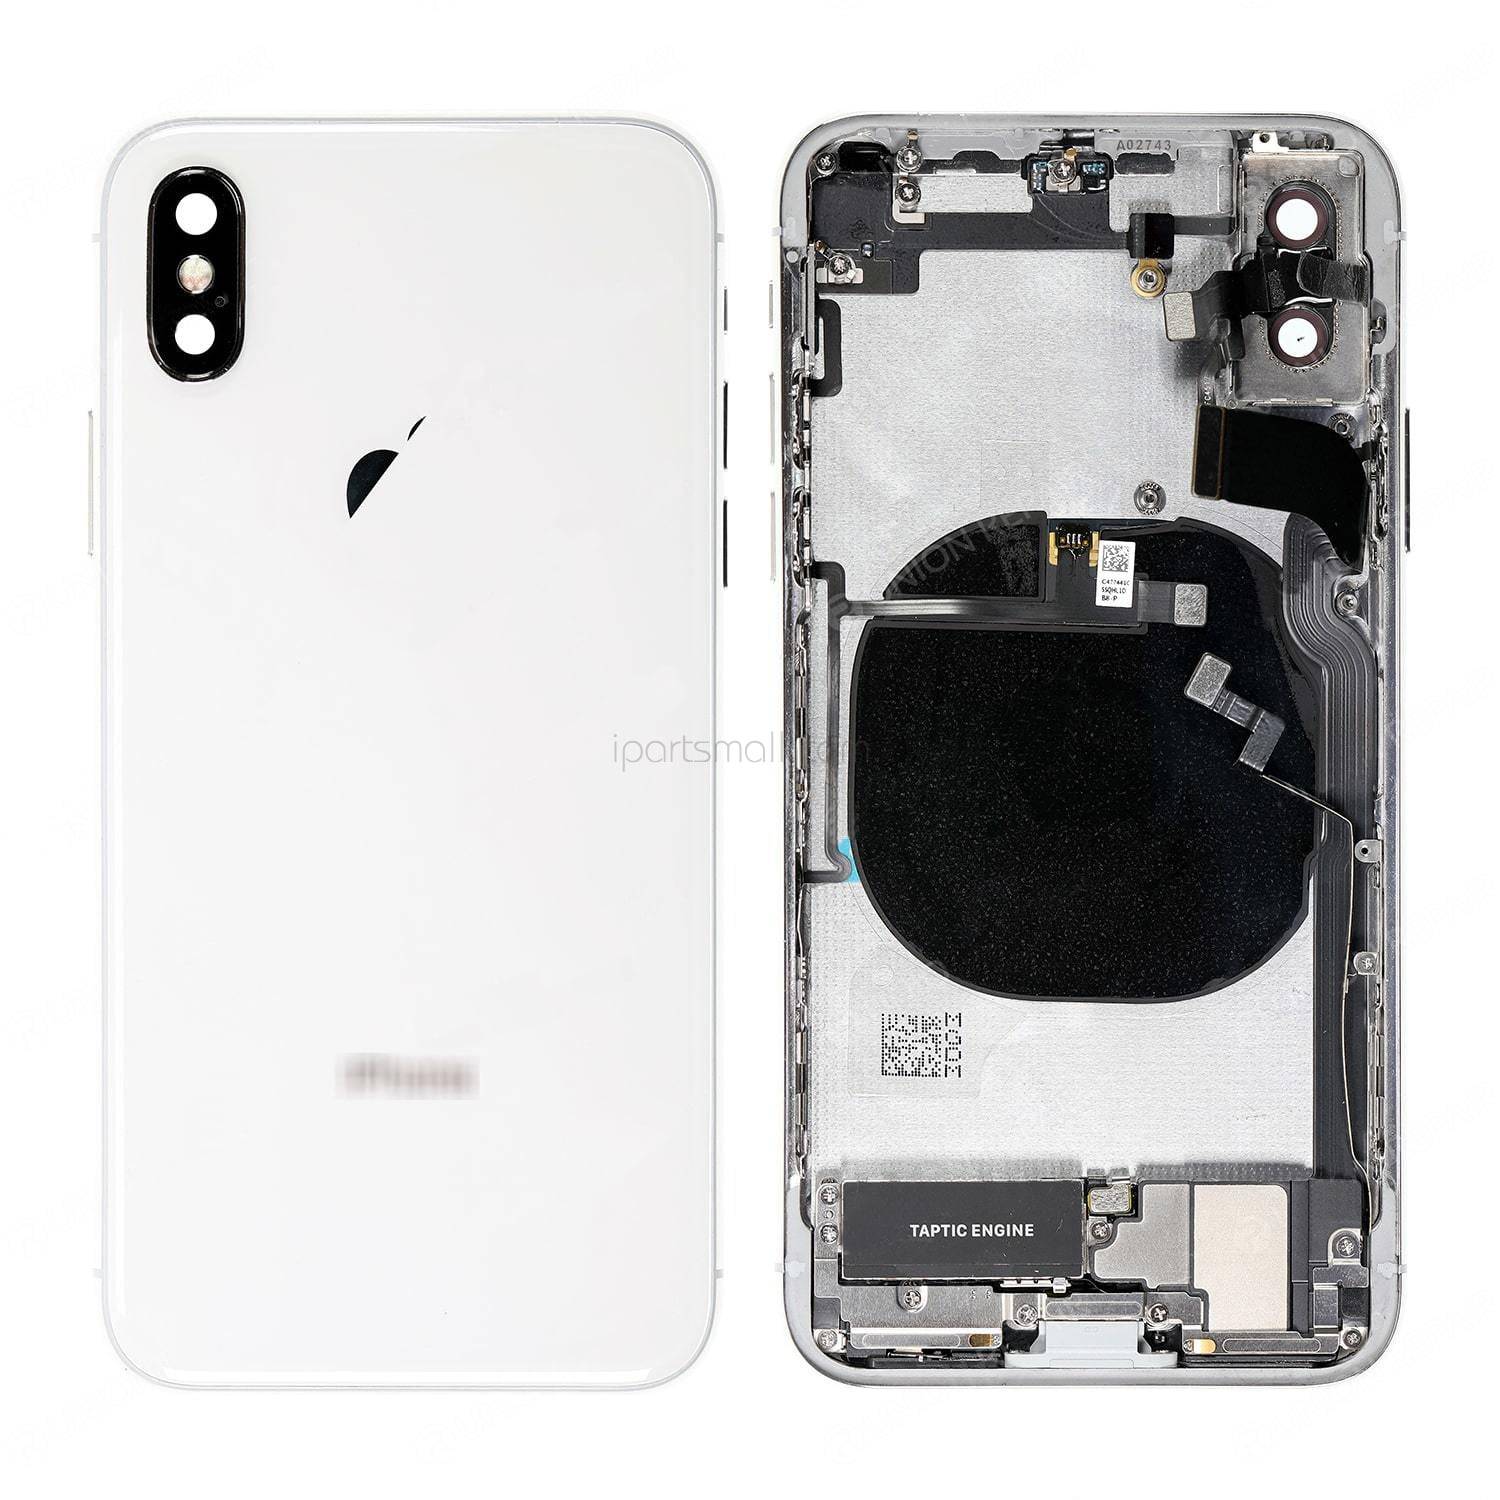 BAZ ME PAISJE IPHONE X  FULL HOUSING IPHONE X WITH CE